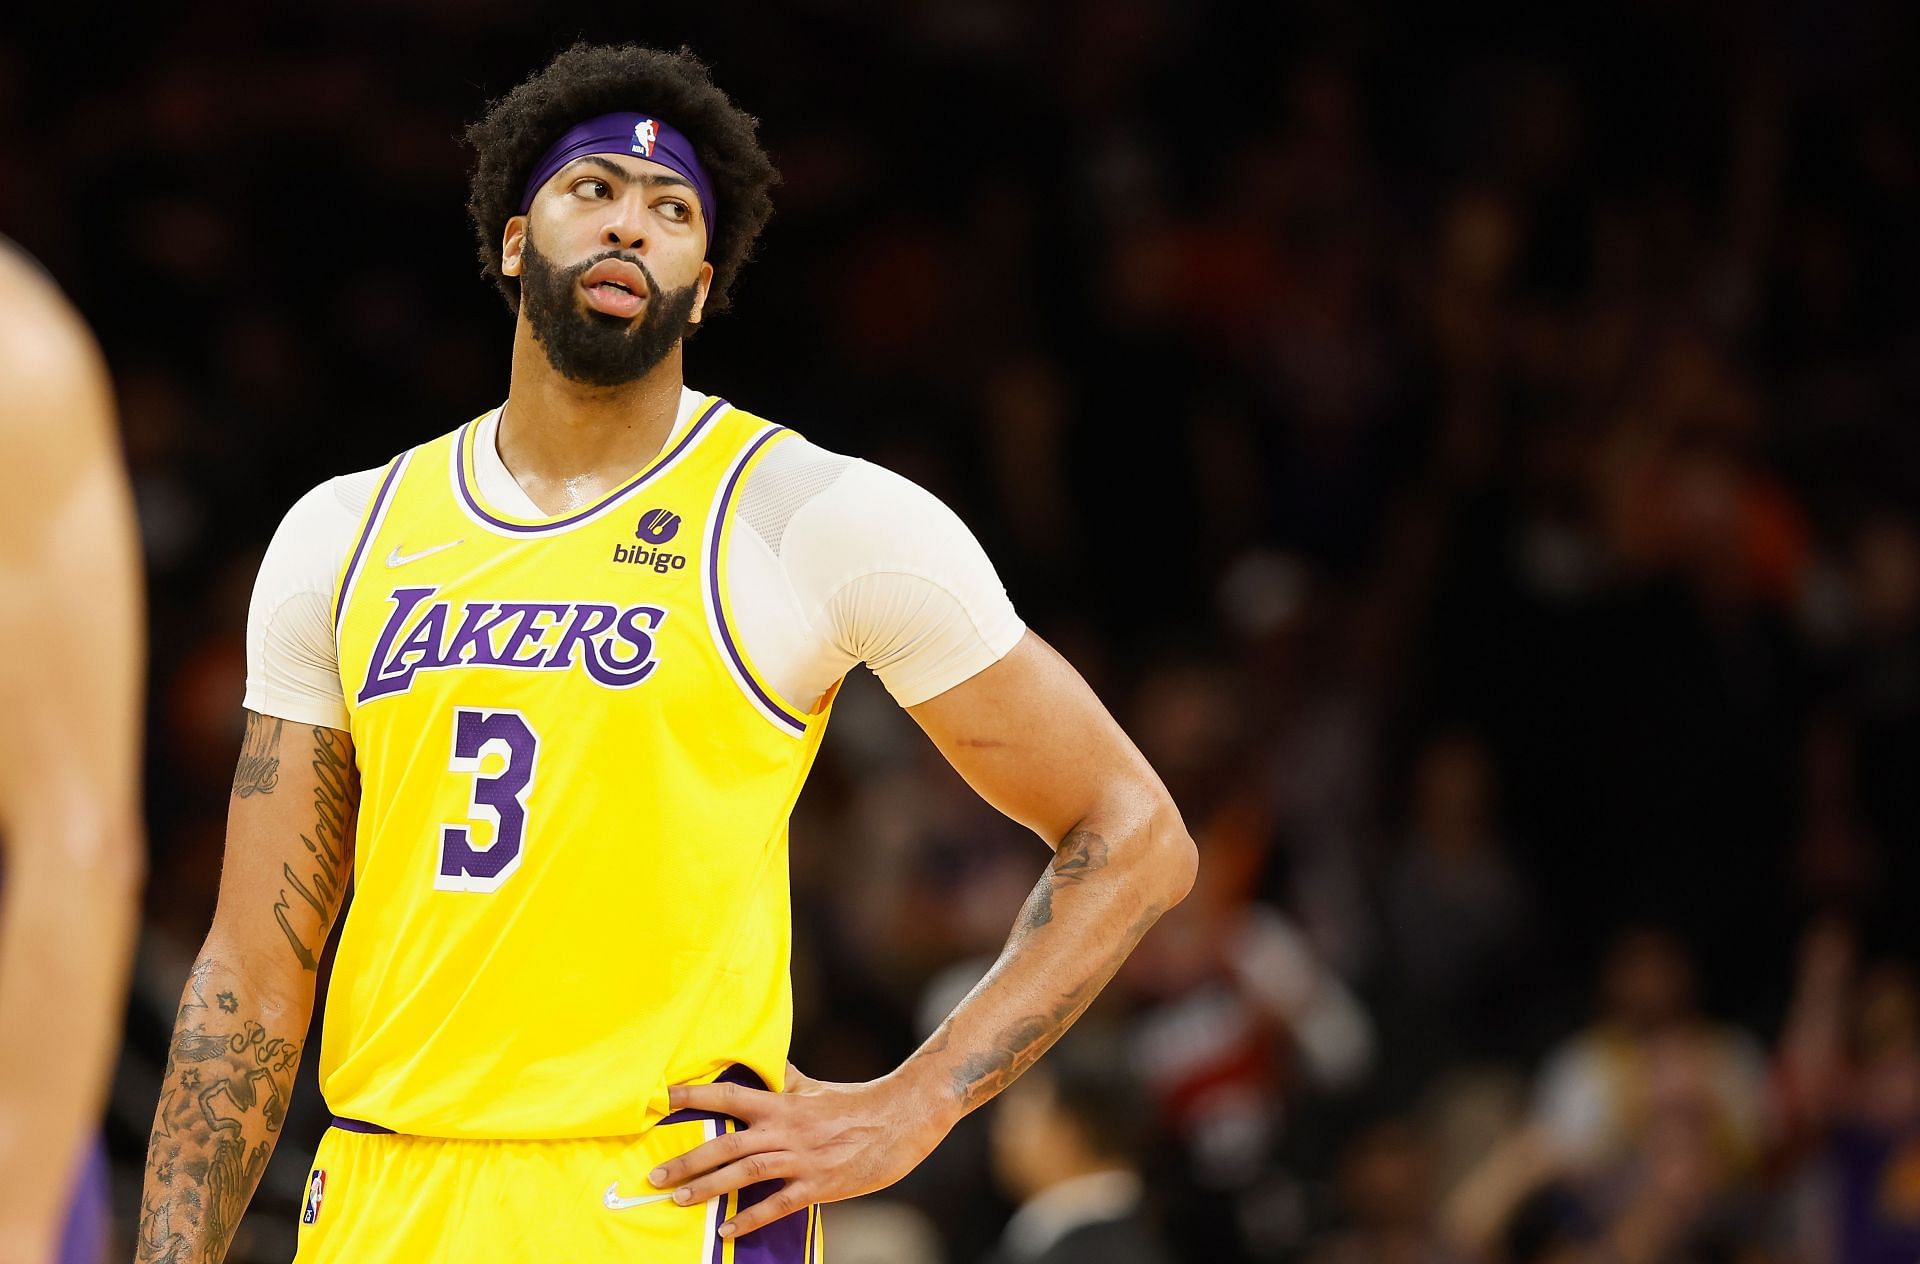 The LA Lakers will have to get much more from Davis. [Image via Getty Images]